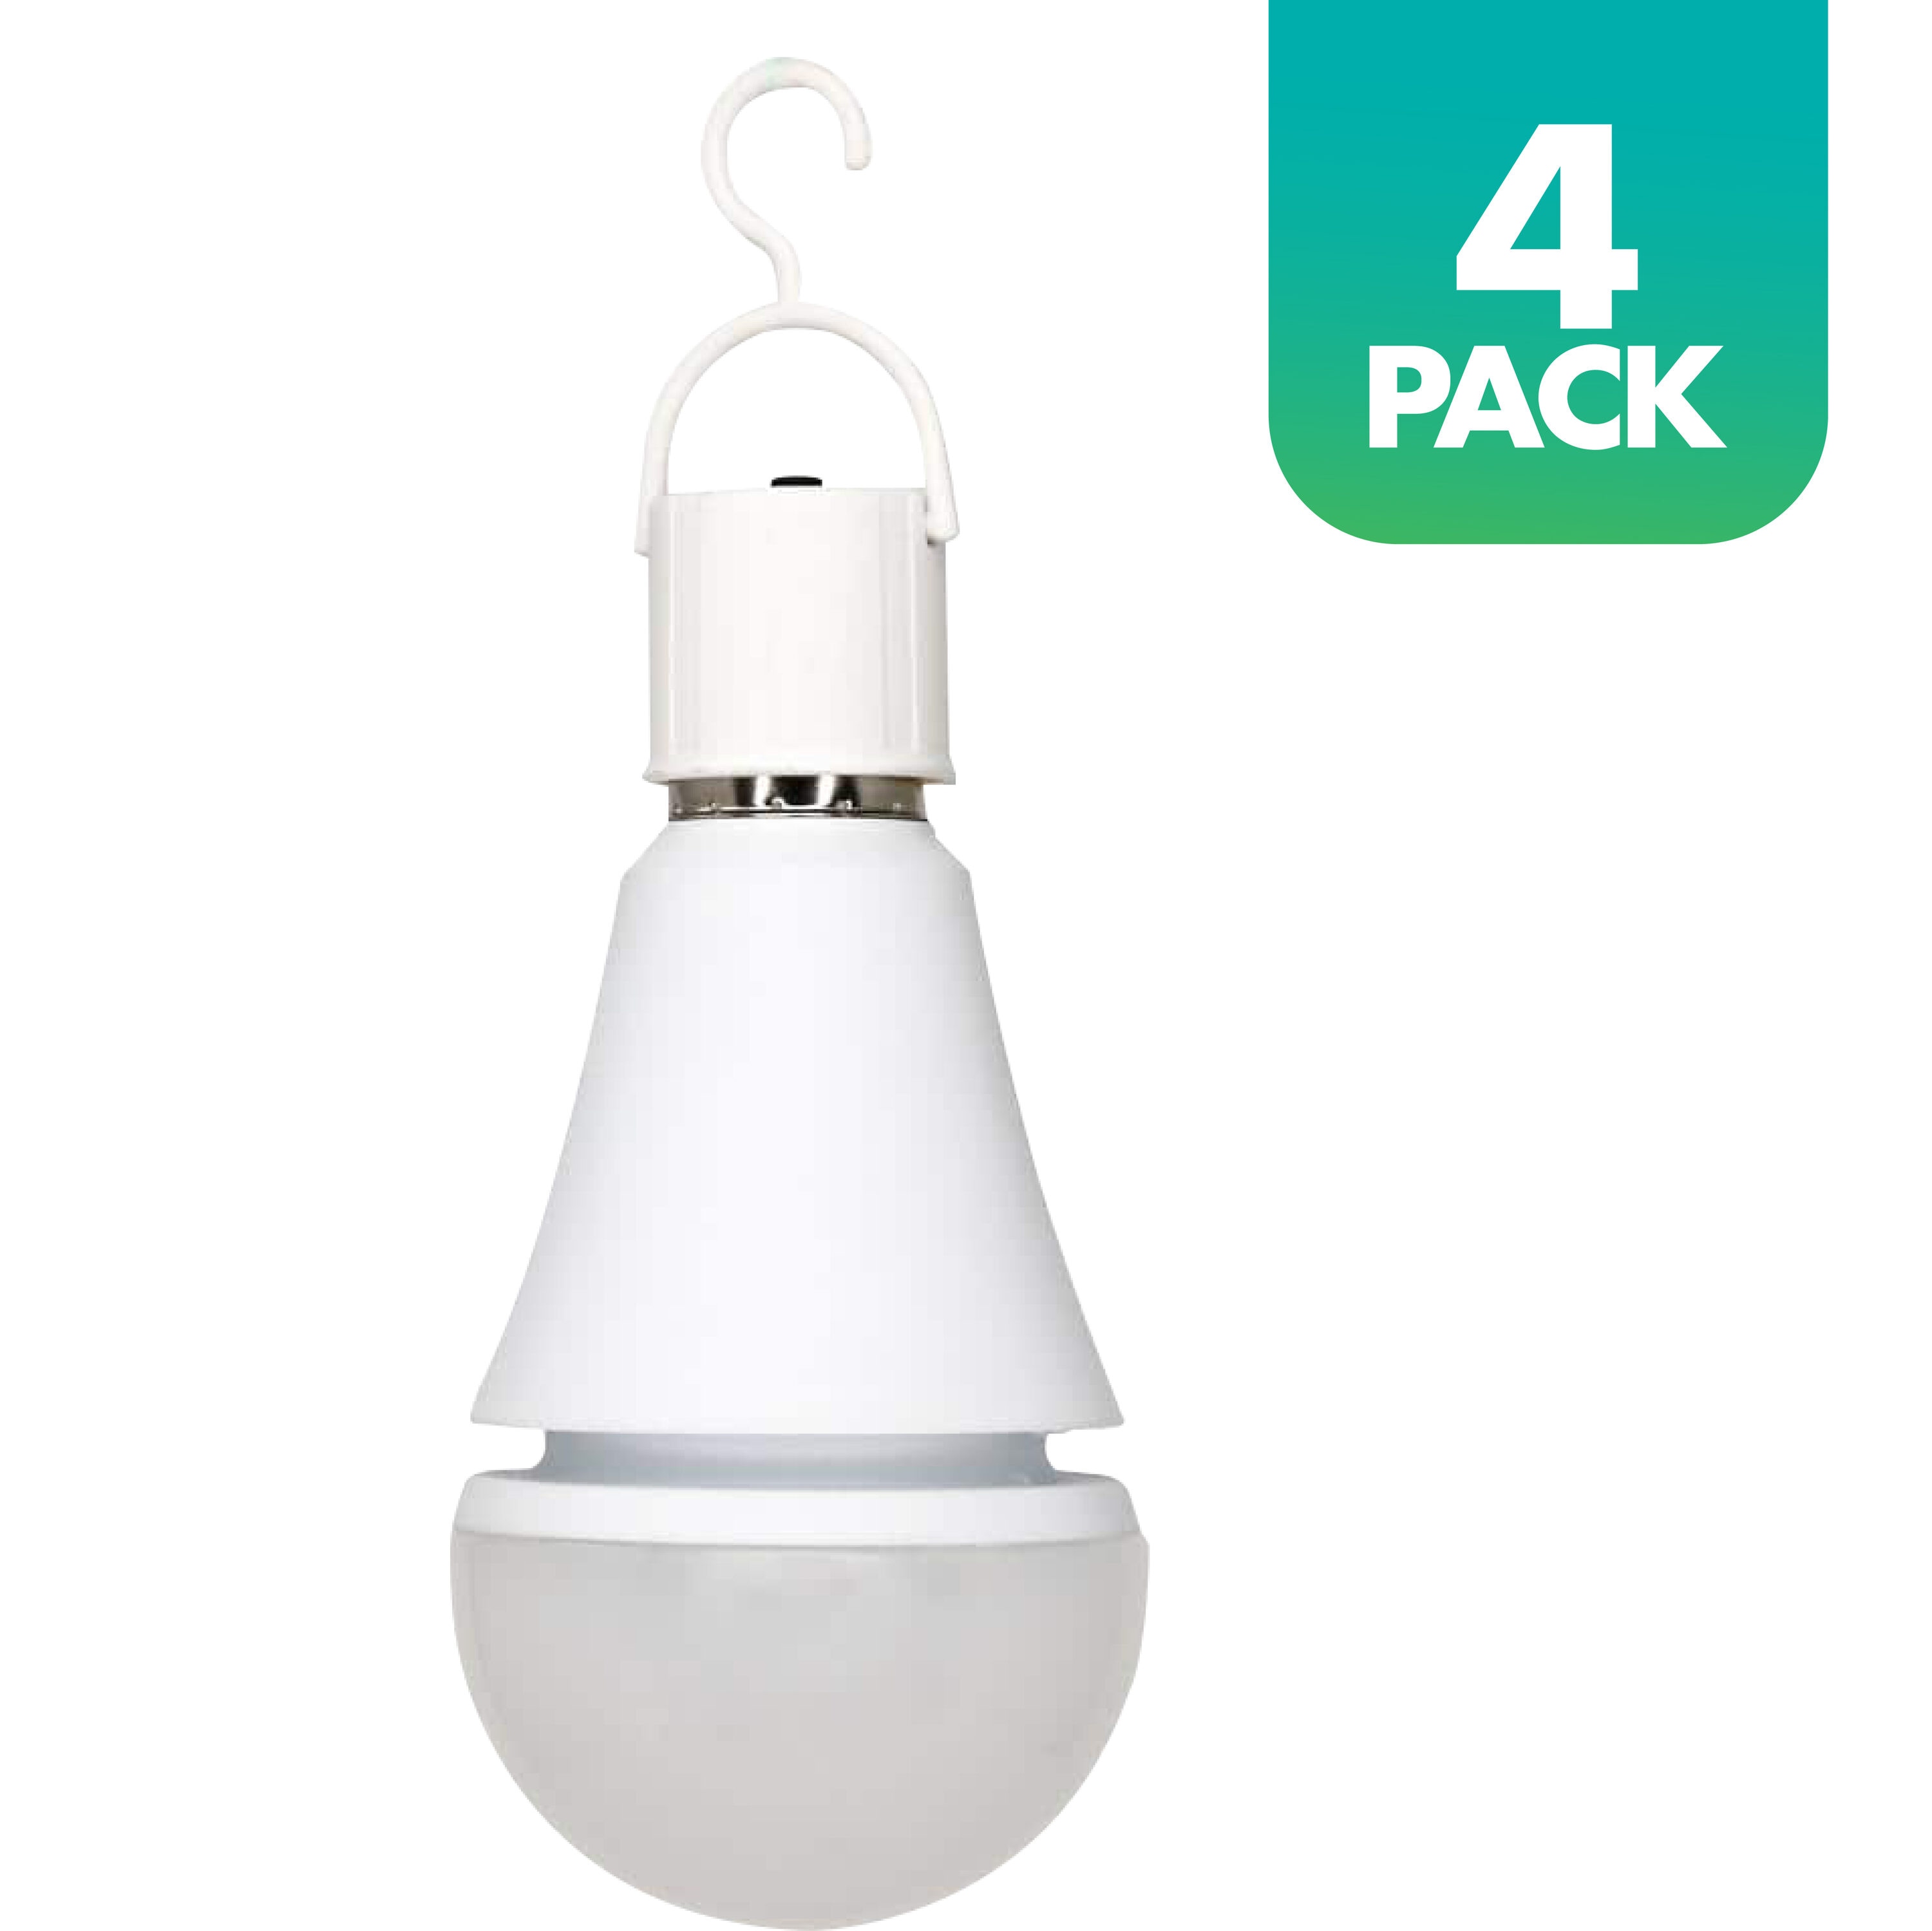 The Surge Emergency Bulb stays on when your power goes out! - The